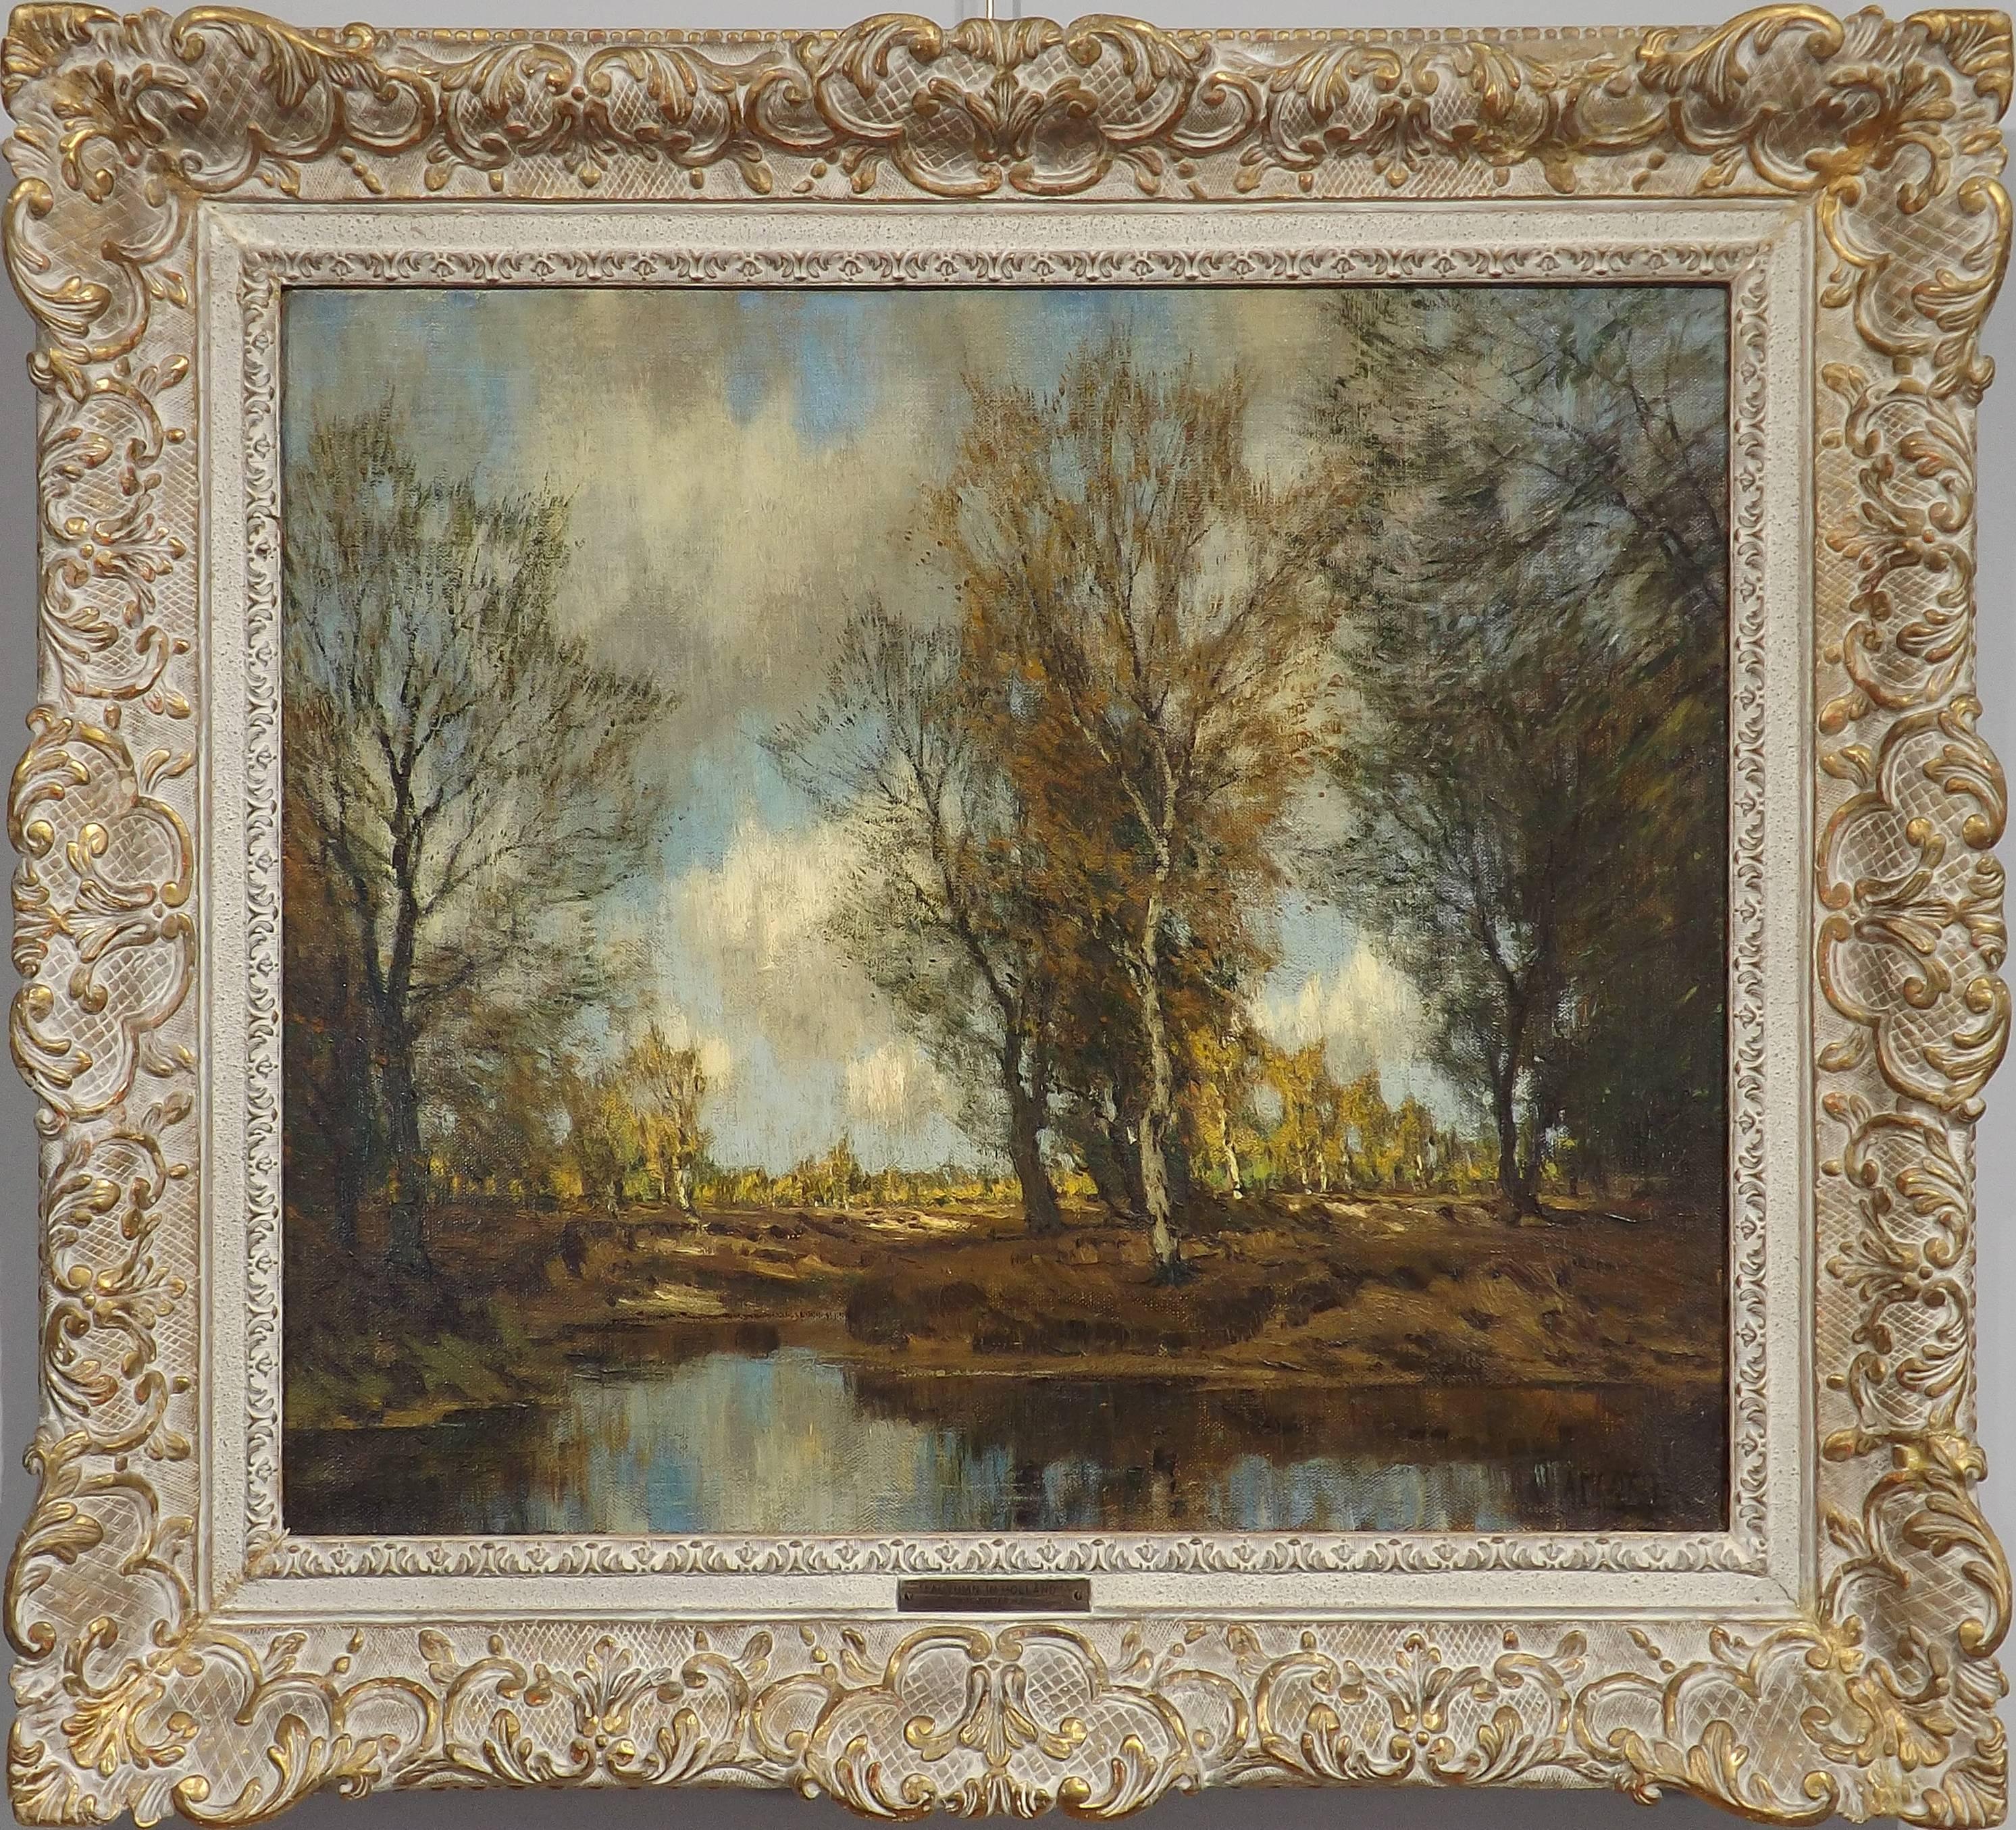 A fine quality atmospheric oil on canvas by the sought after artist Arnold Marc Gorter (Dutch 1866-1933).

Leading landscape painter who drew inspiration for his work from areas in the eastern Netherlands like Twente, the Achterhoek and Drenthe.